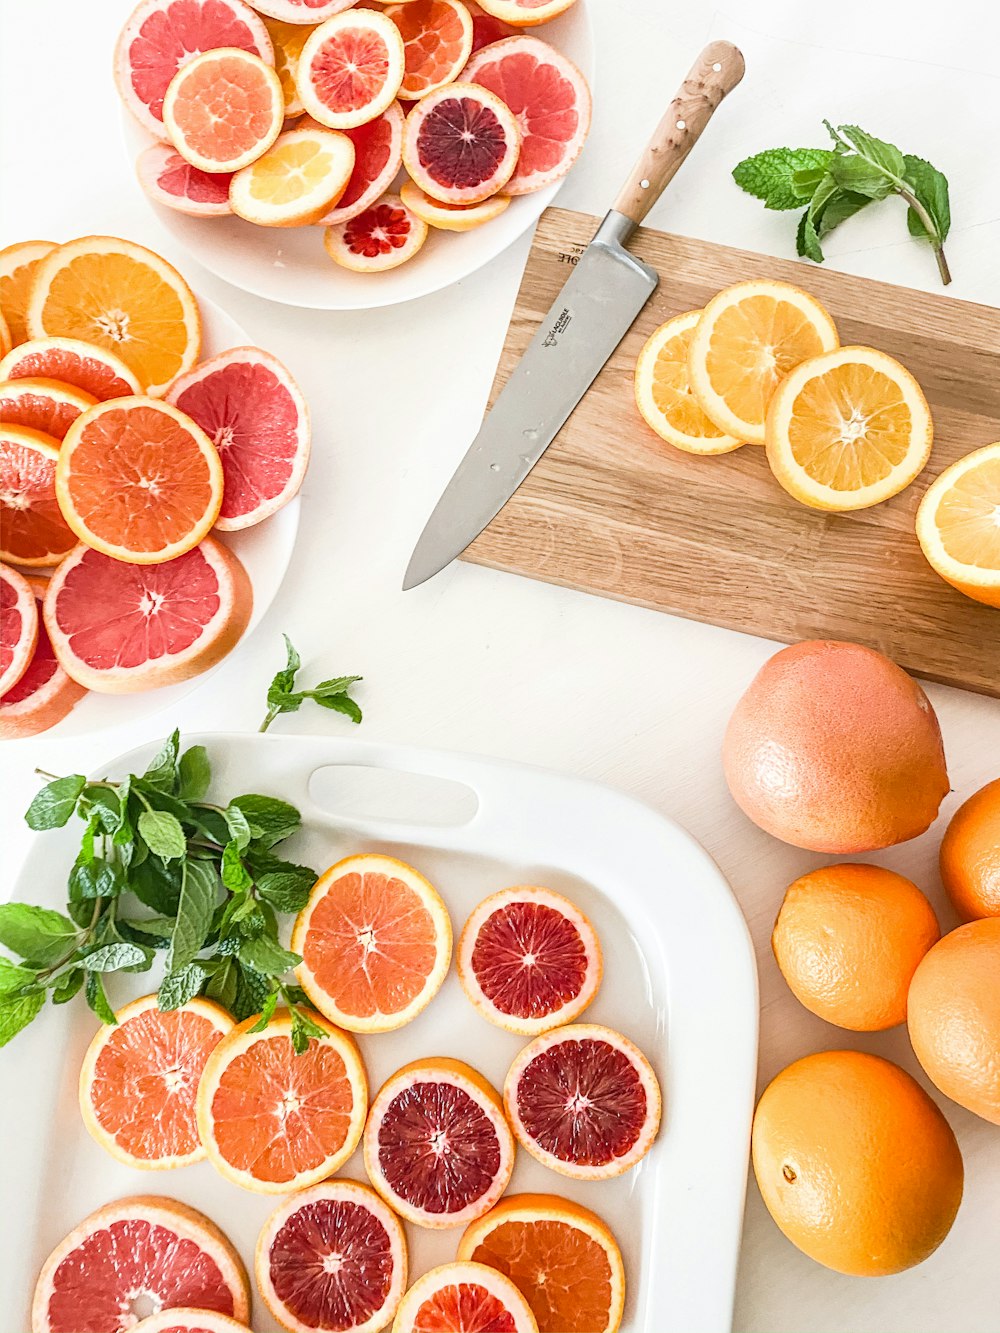 slices of grapefruits